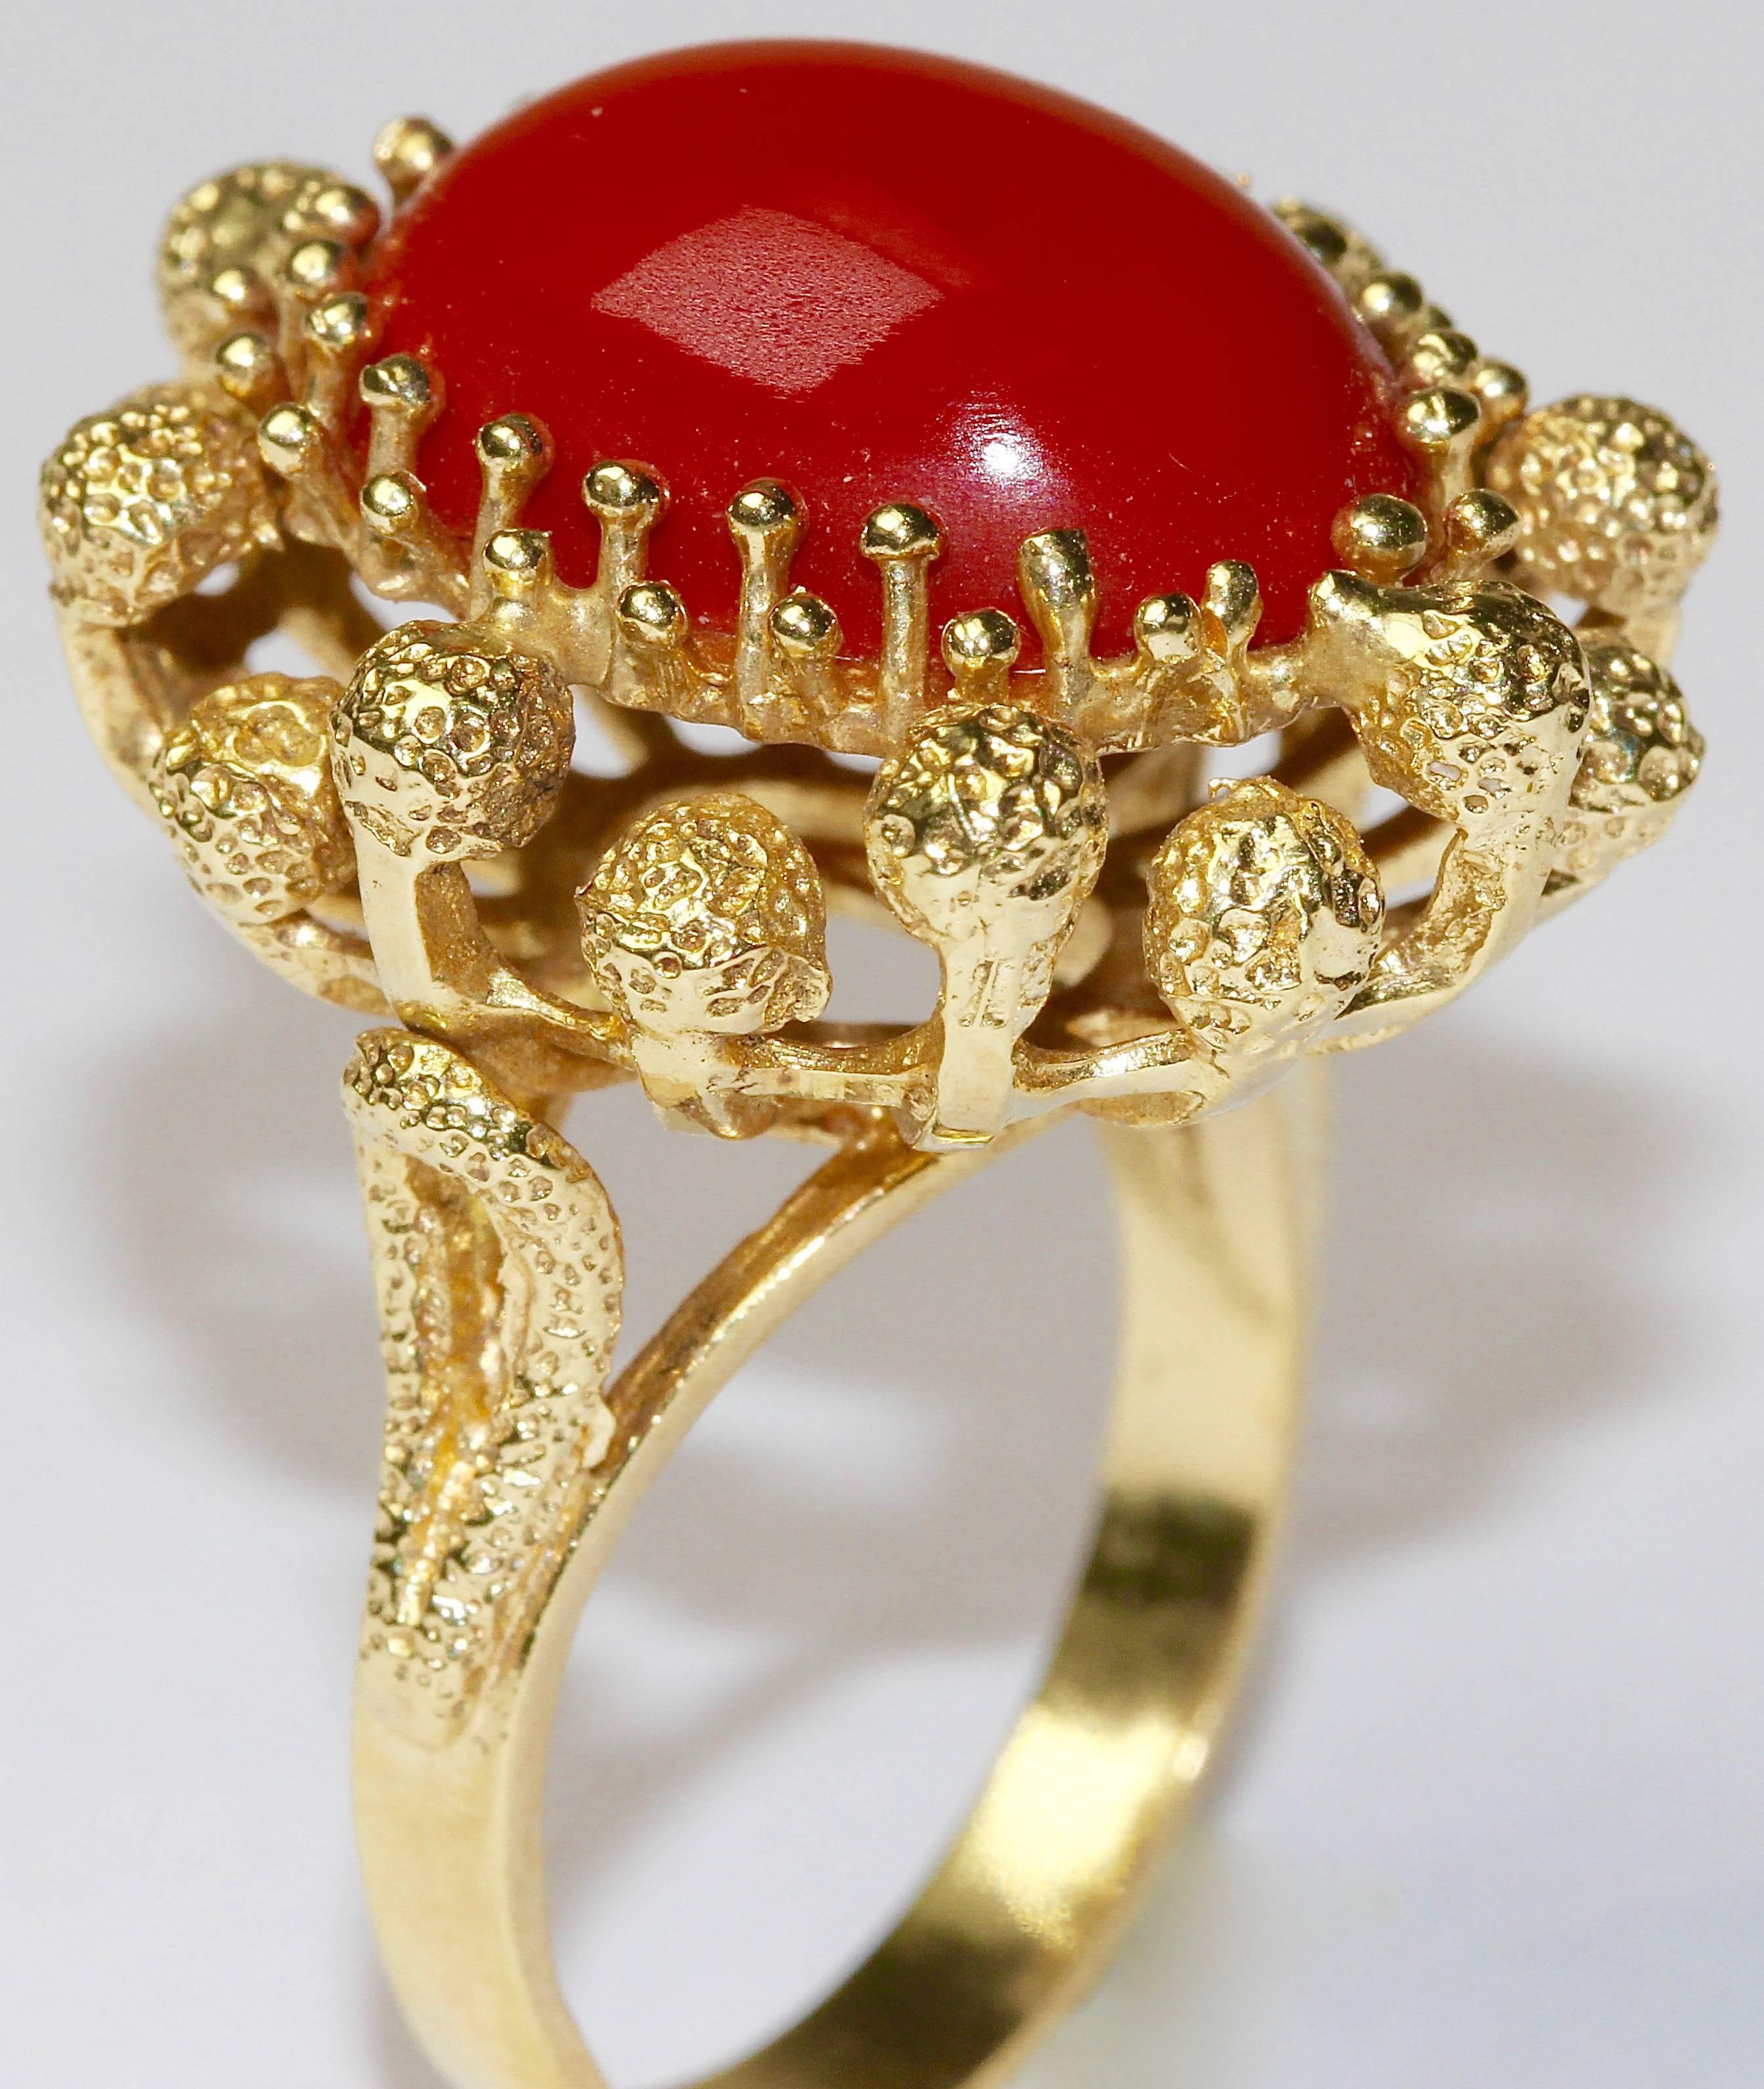 Oval Cut 14 Karat Gold Ring with Big Oval Salmon Coral For Sale